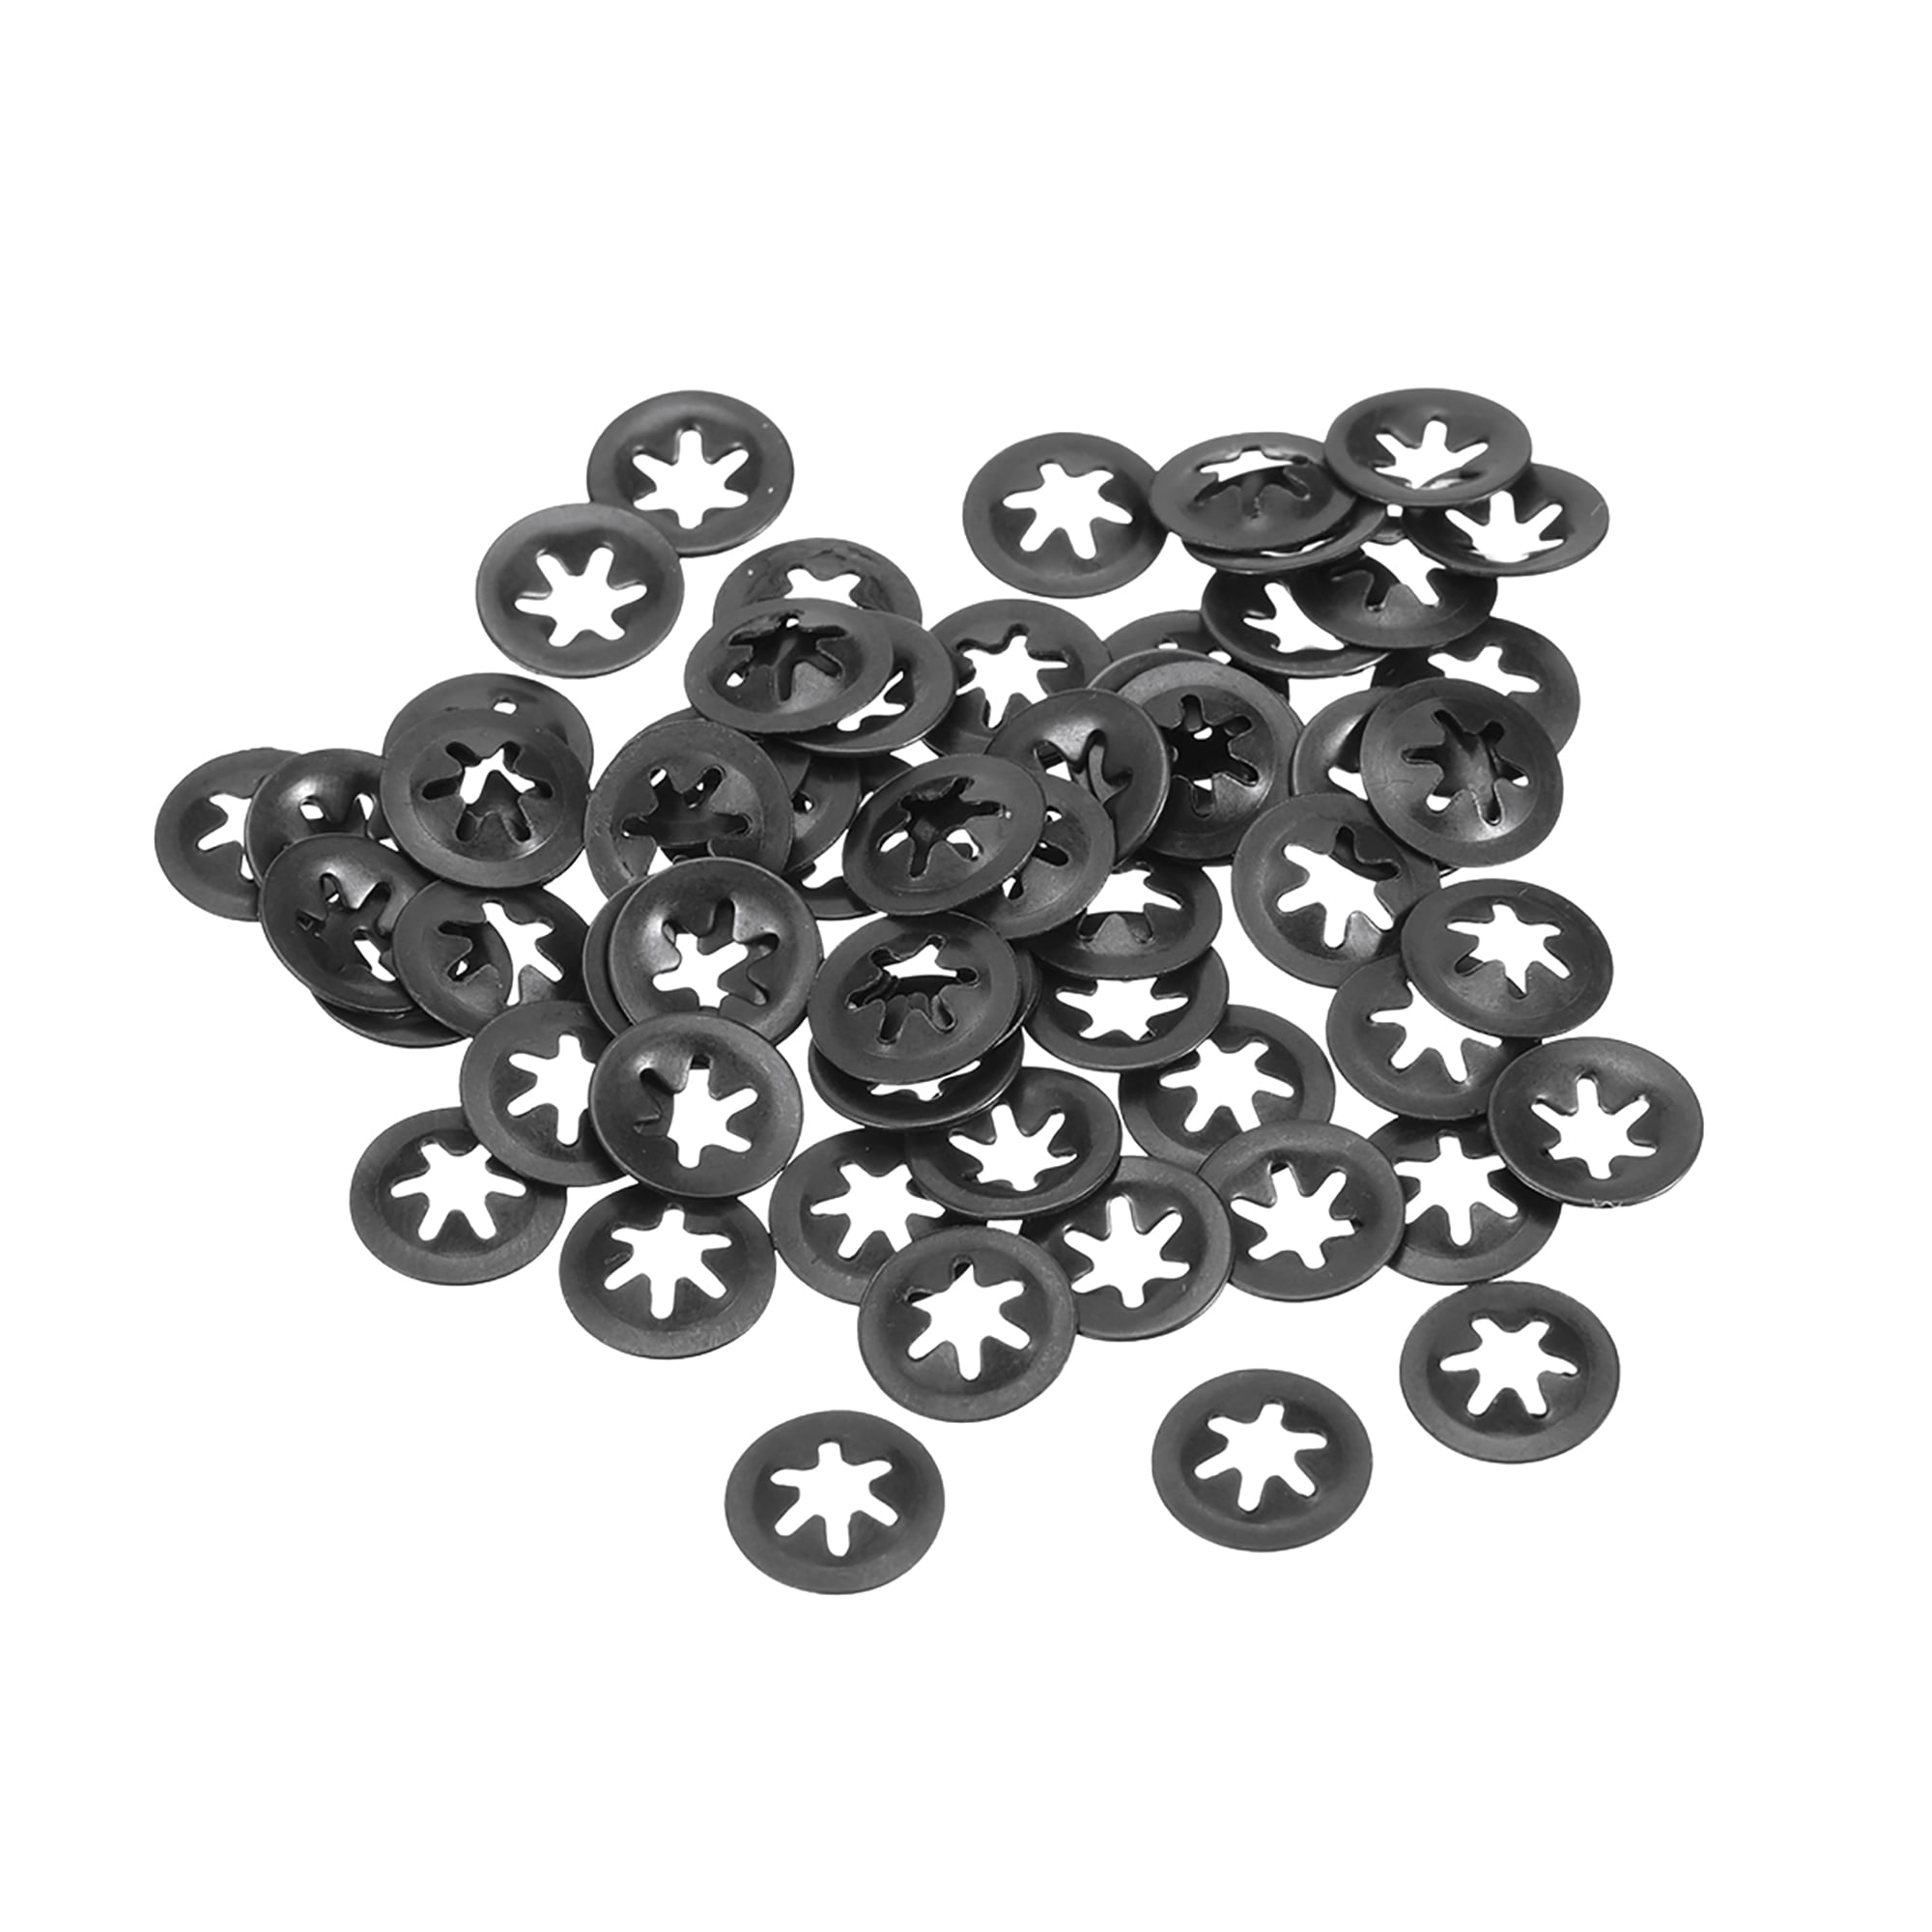 uxcell M5 Starlock Washer 4.3mm I.D Internal Tooth Lock Washers Push On Locking Speed Clip 65Mn Black Oxide Finish Pack of 40 12mm O.D 